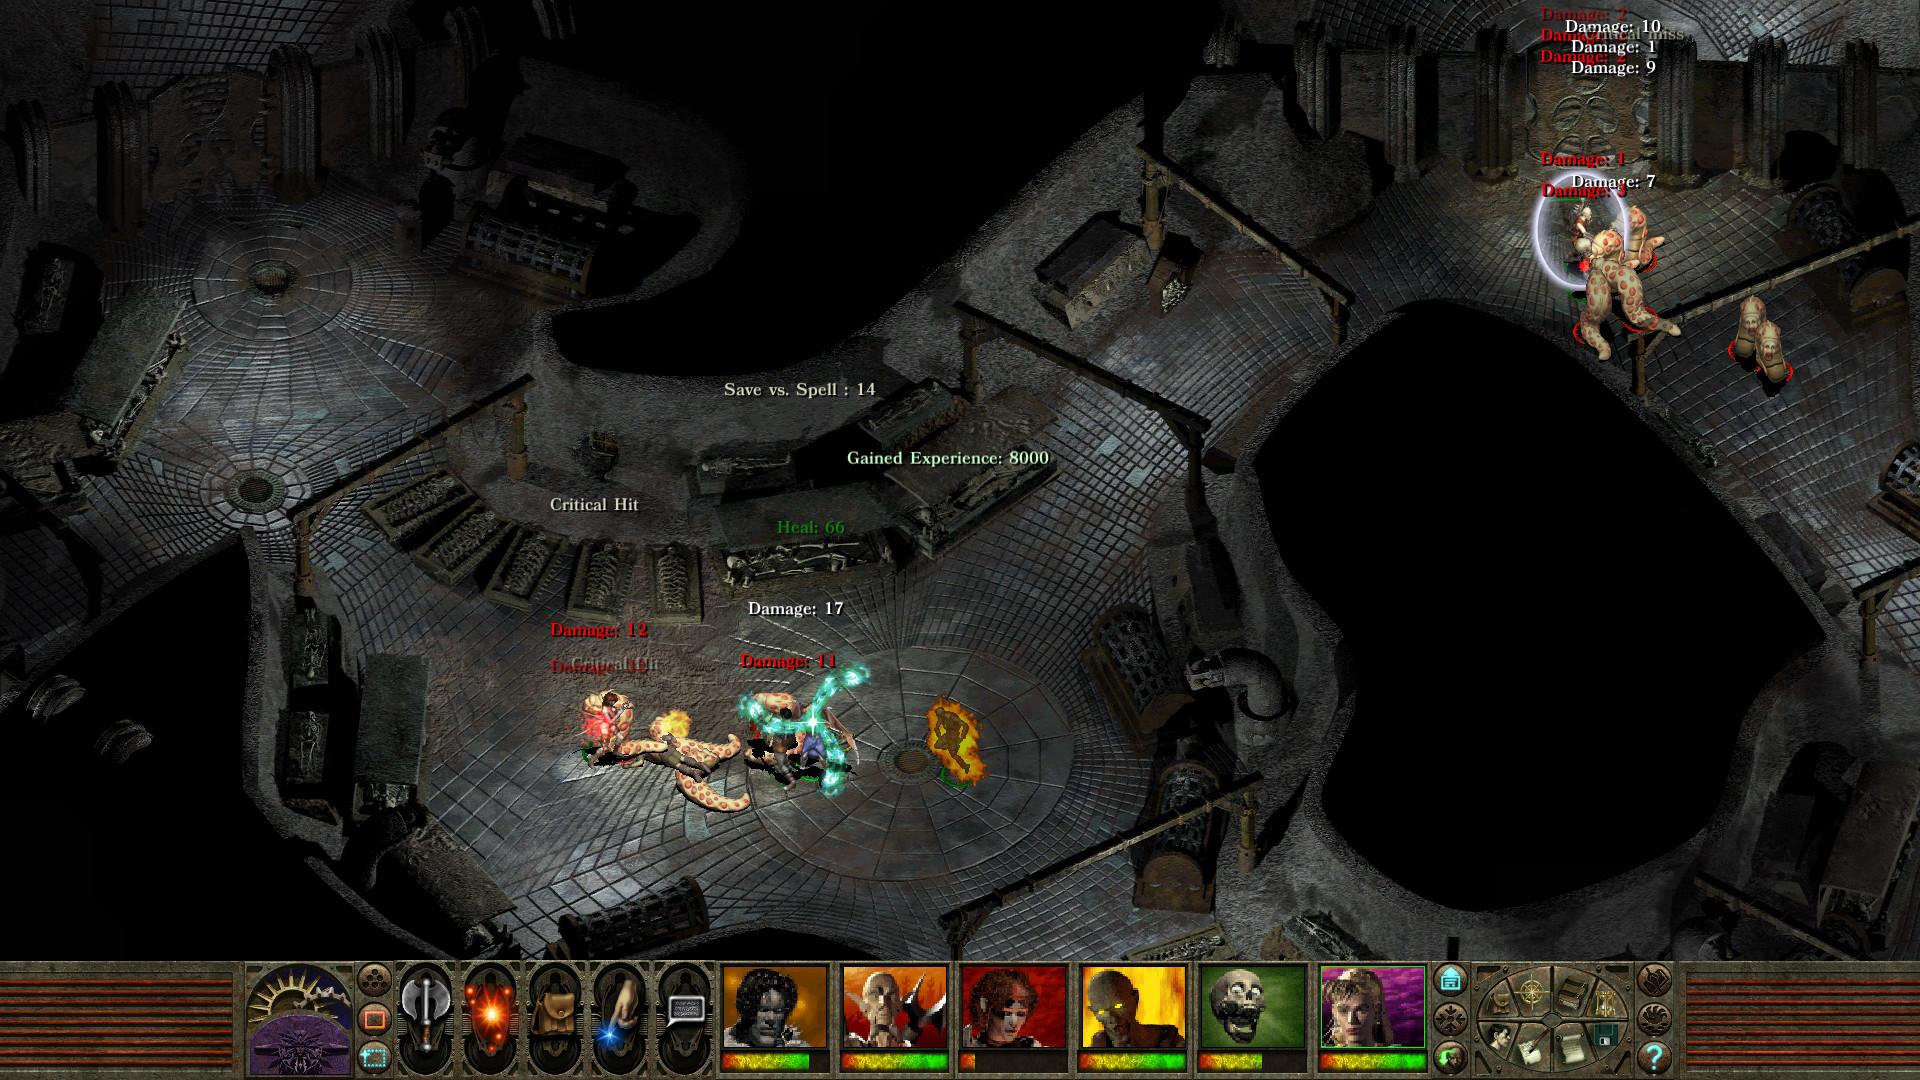 Screenshot №12 from game Planescape: Torment: Enhanced Edition